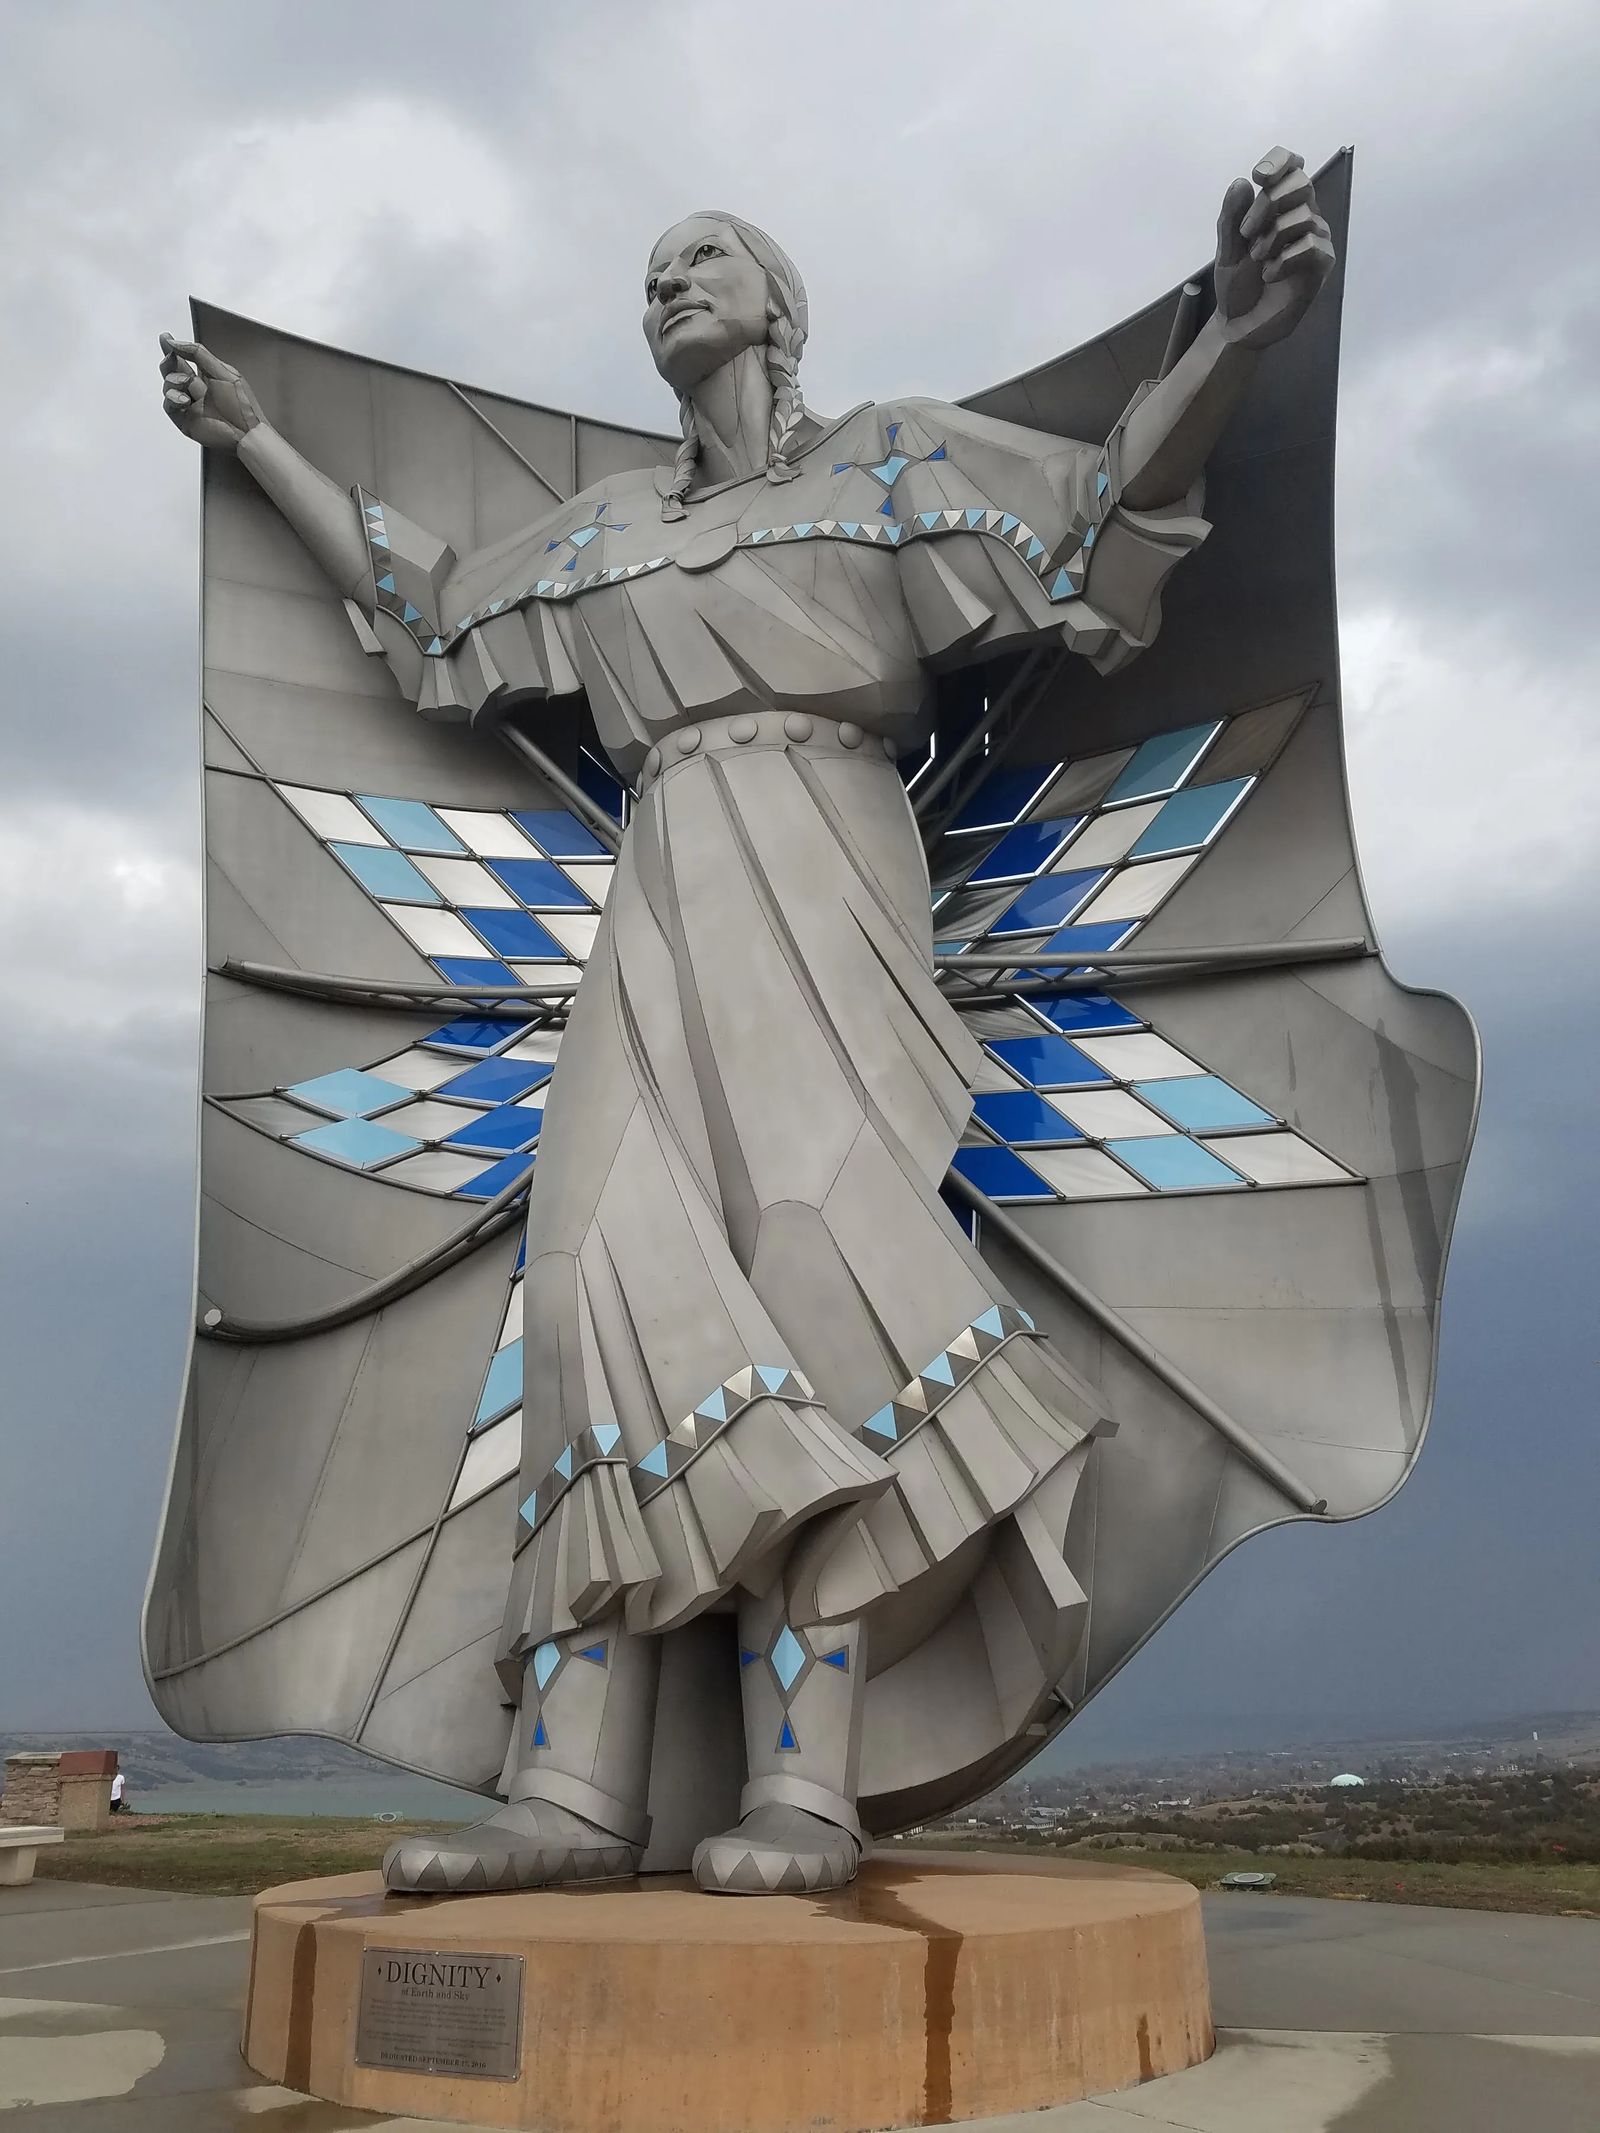 A photo of the "Dignity of Earth and Sky" statue in Chamberlain, South Dakota